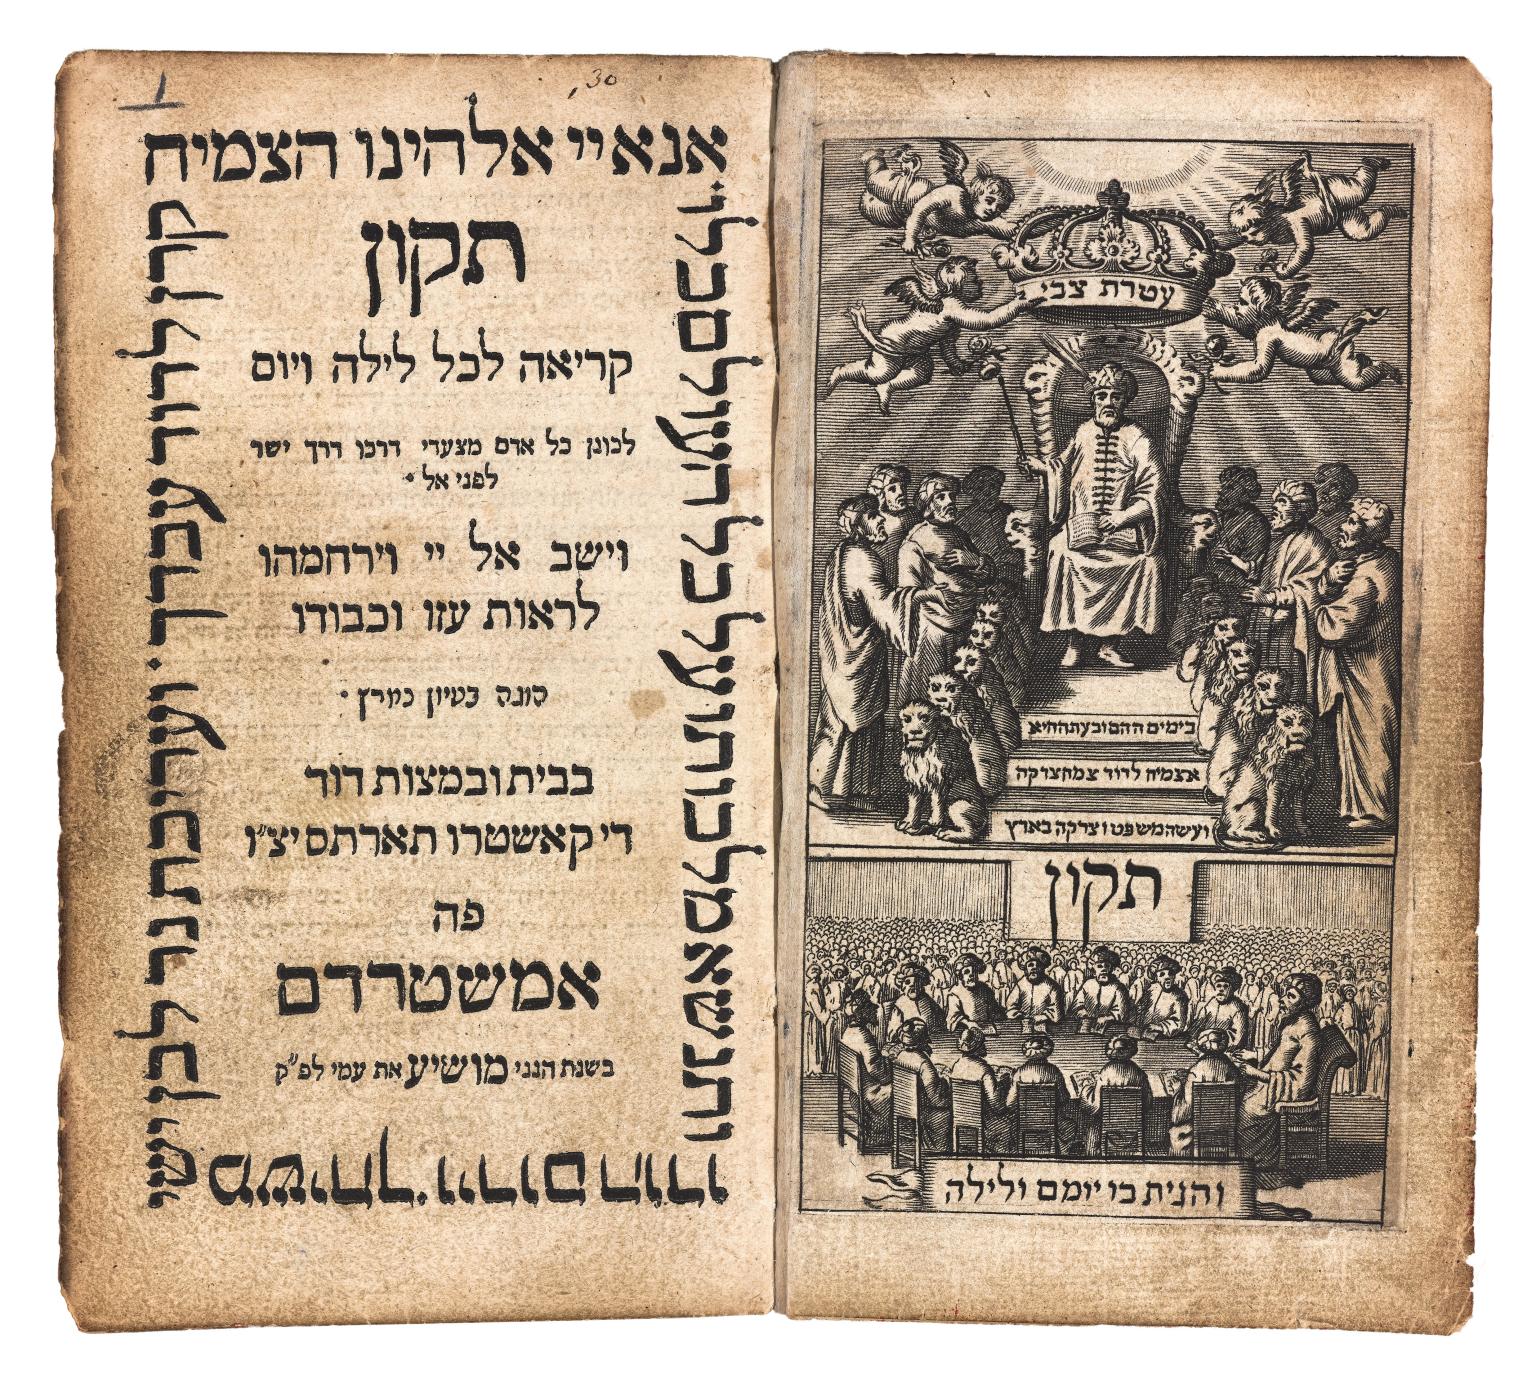 Facing-page print with Hebrew text on left page and engraving on right page depicting man seated on a throne with lions and people below him and cherubs holding crown above him, and Hebrew inscription, and illustration below of men seated around a table with a crowd of people beyond.